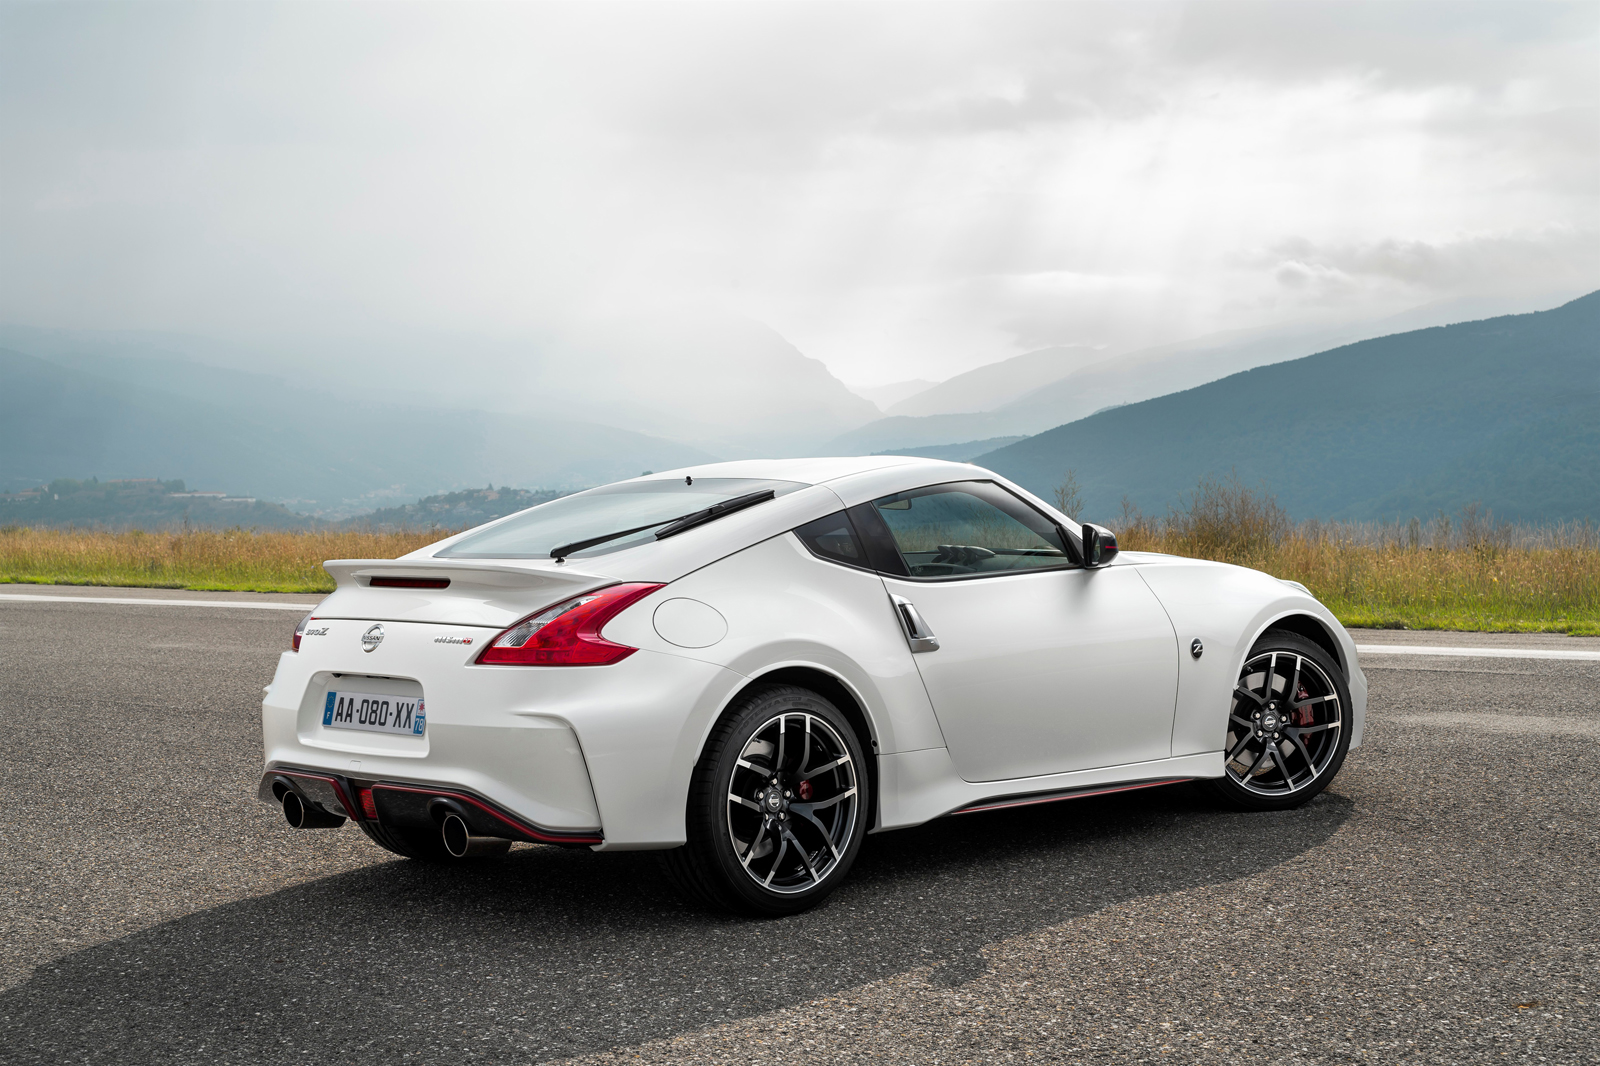 Nissan 370z Wallpapers Vehicles Hq Nissan 370z Pictures 4k Images, Photos, Reviews